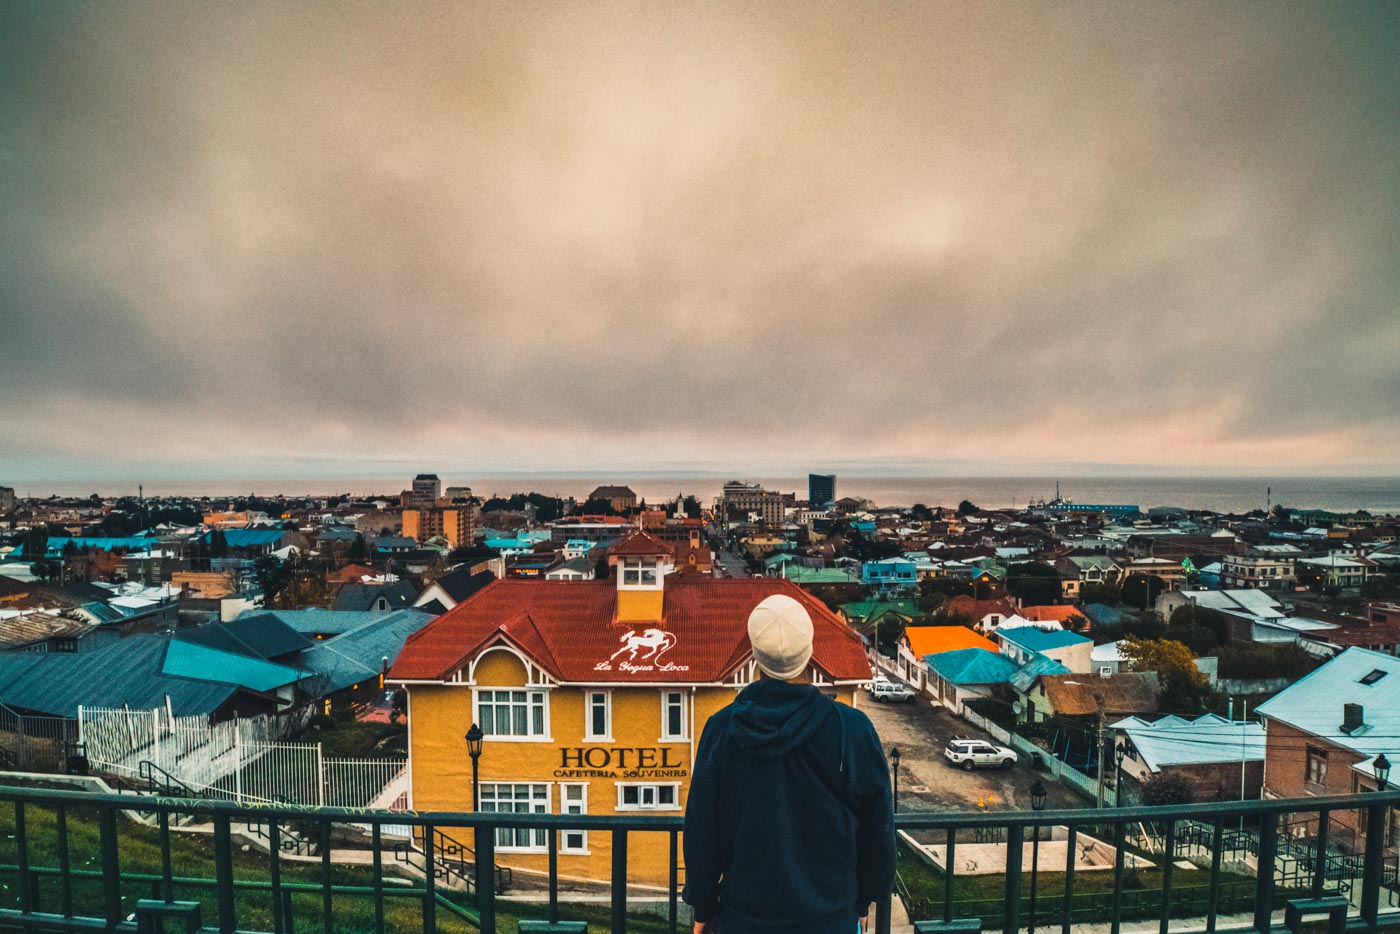 Overlooking the colourful rooftops of Punta Arenas, Patagonia, Chile